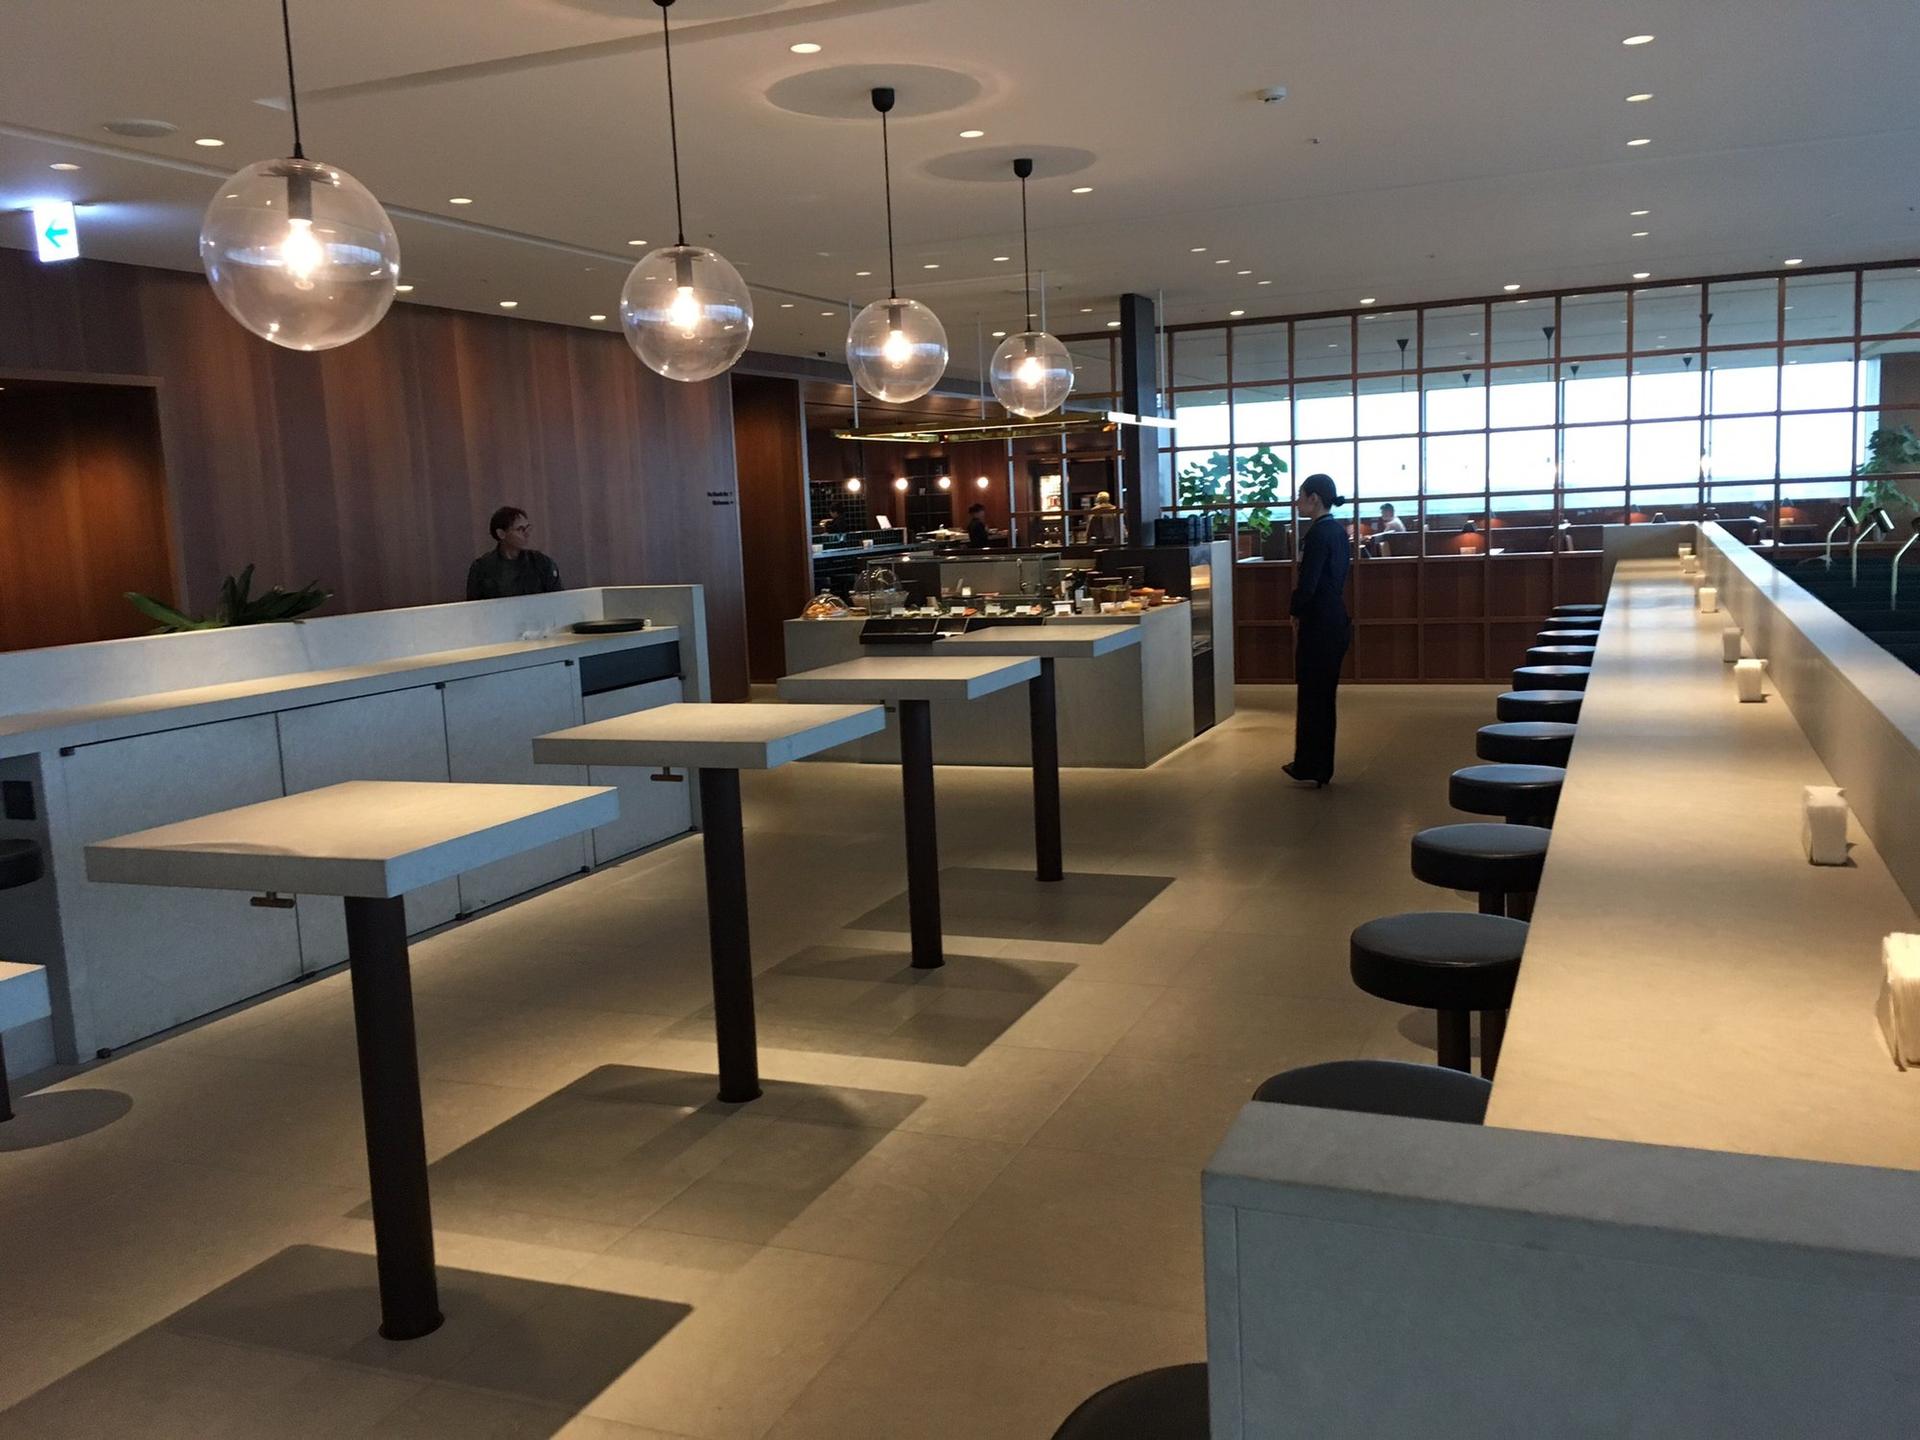 Cathay Pacific Lounge image 21 of 49